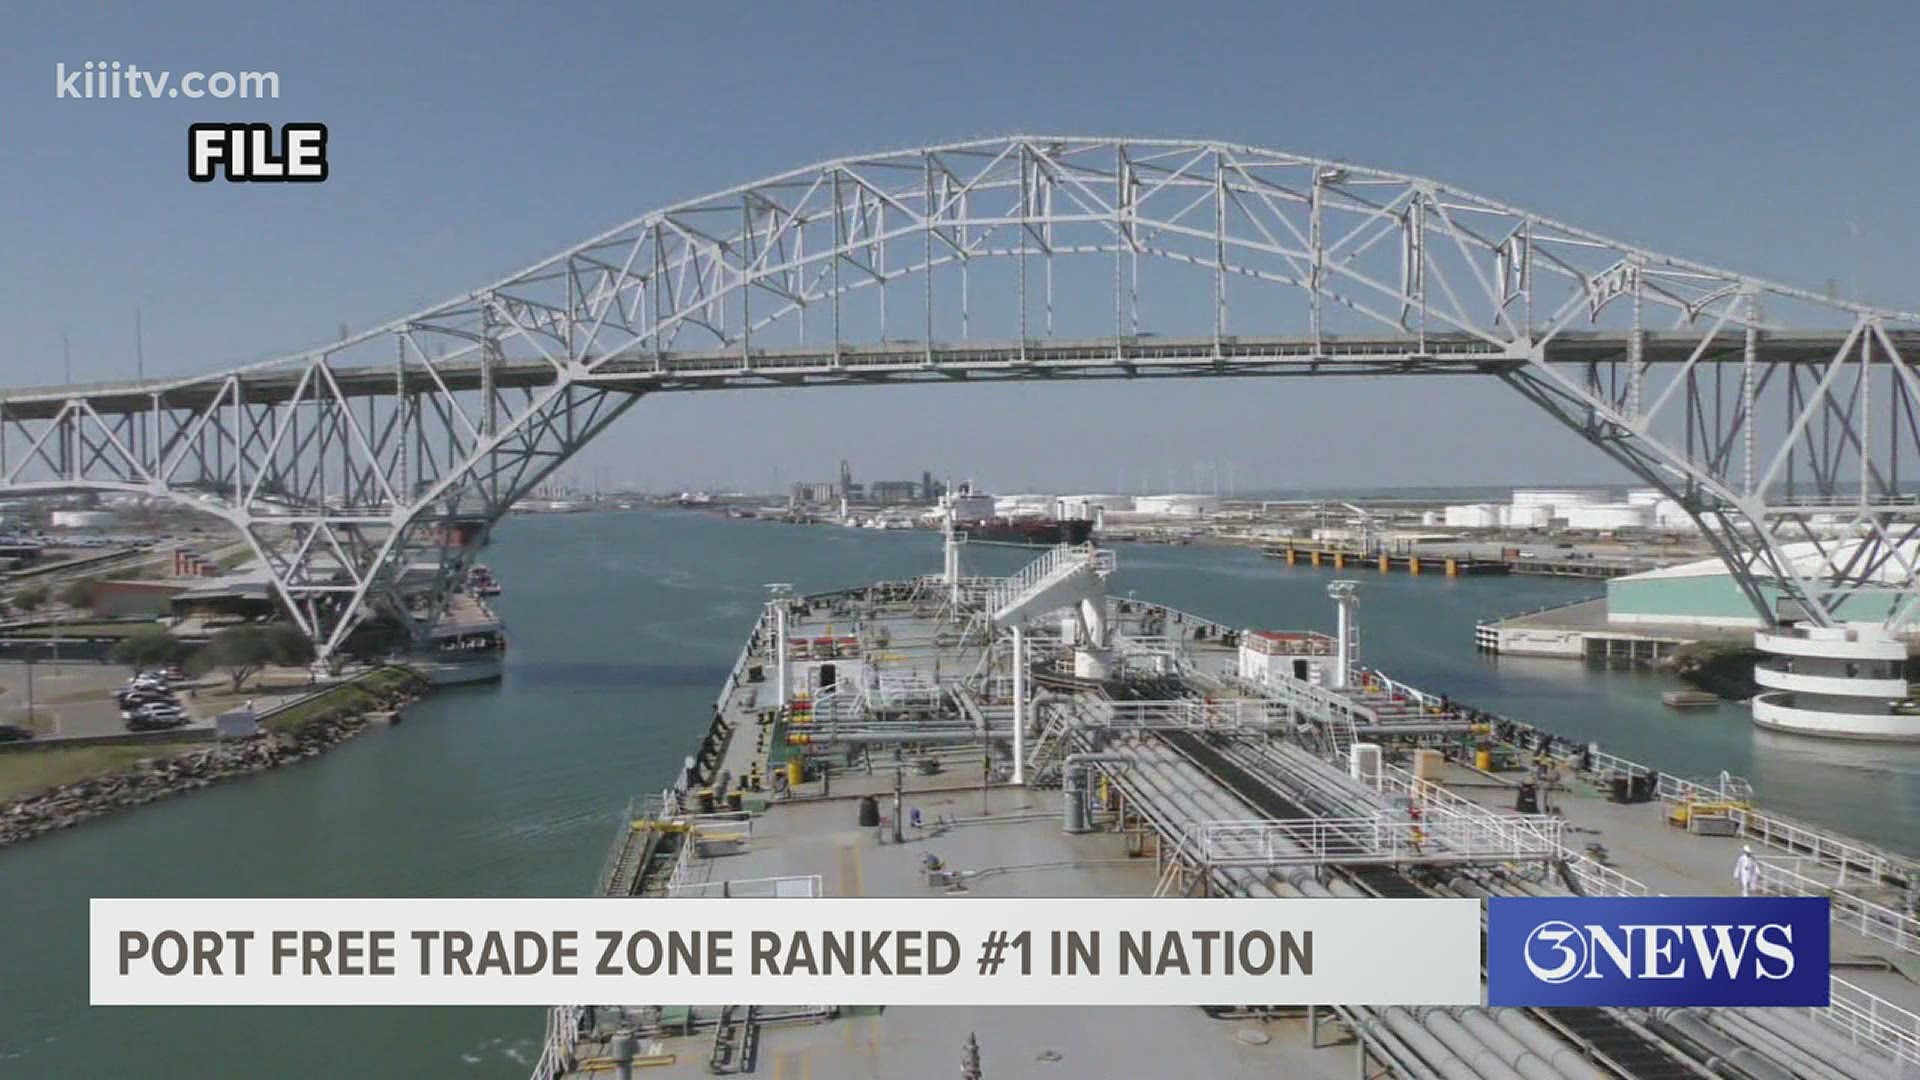 The ranking makes the Port of Corpus Christi the number one port in the entire state for the rate of new industries and new jobs.